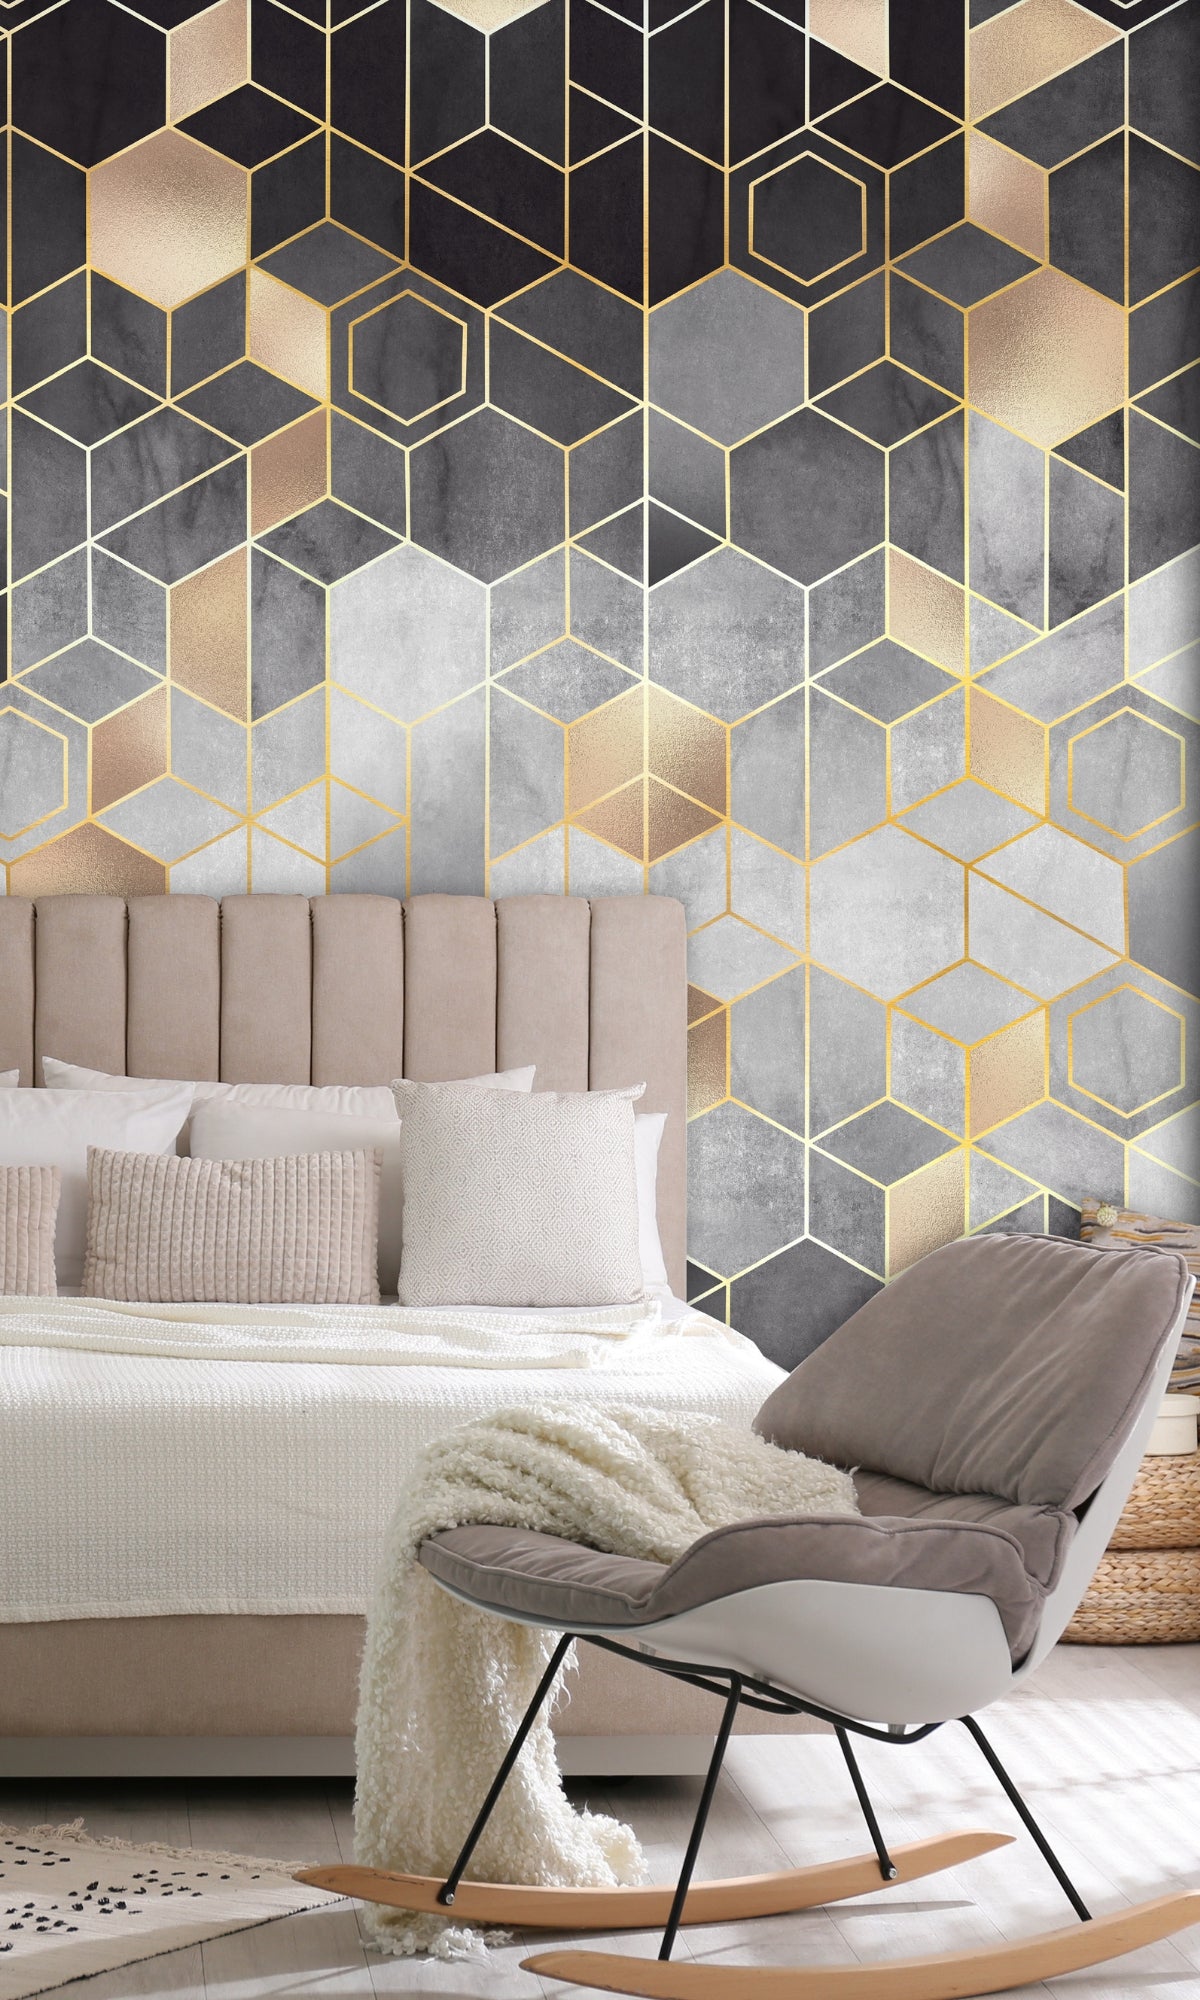 Gray & Gold Geometric Abstraction of Hexagons Mural Wallpaper M1305-Sample